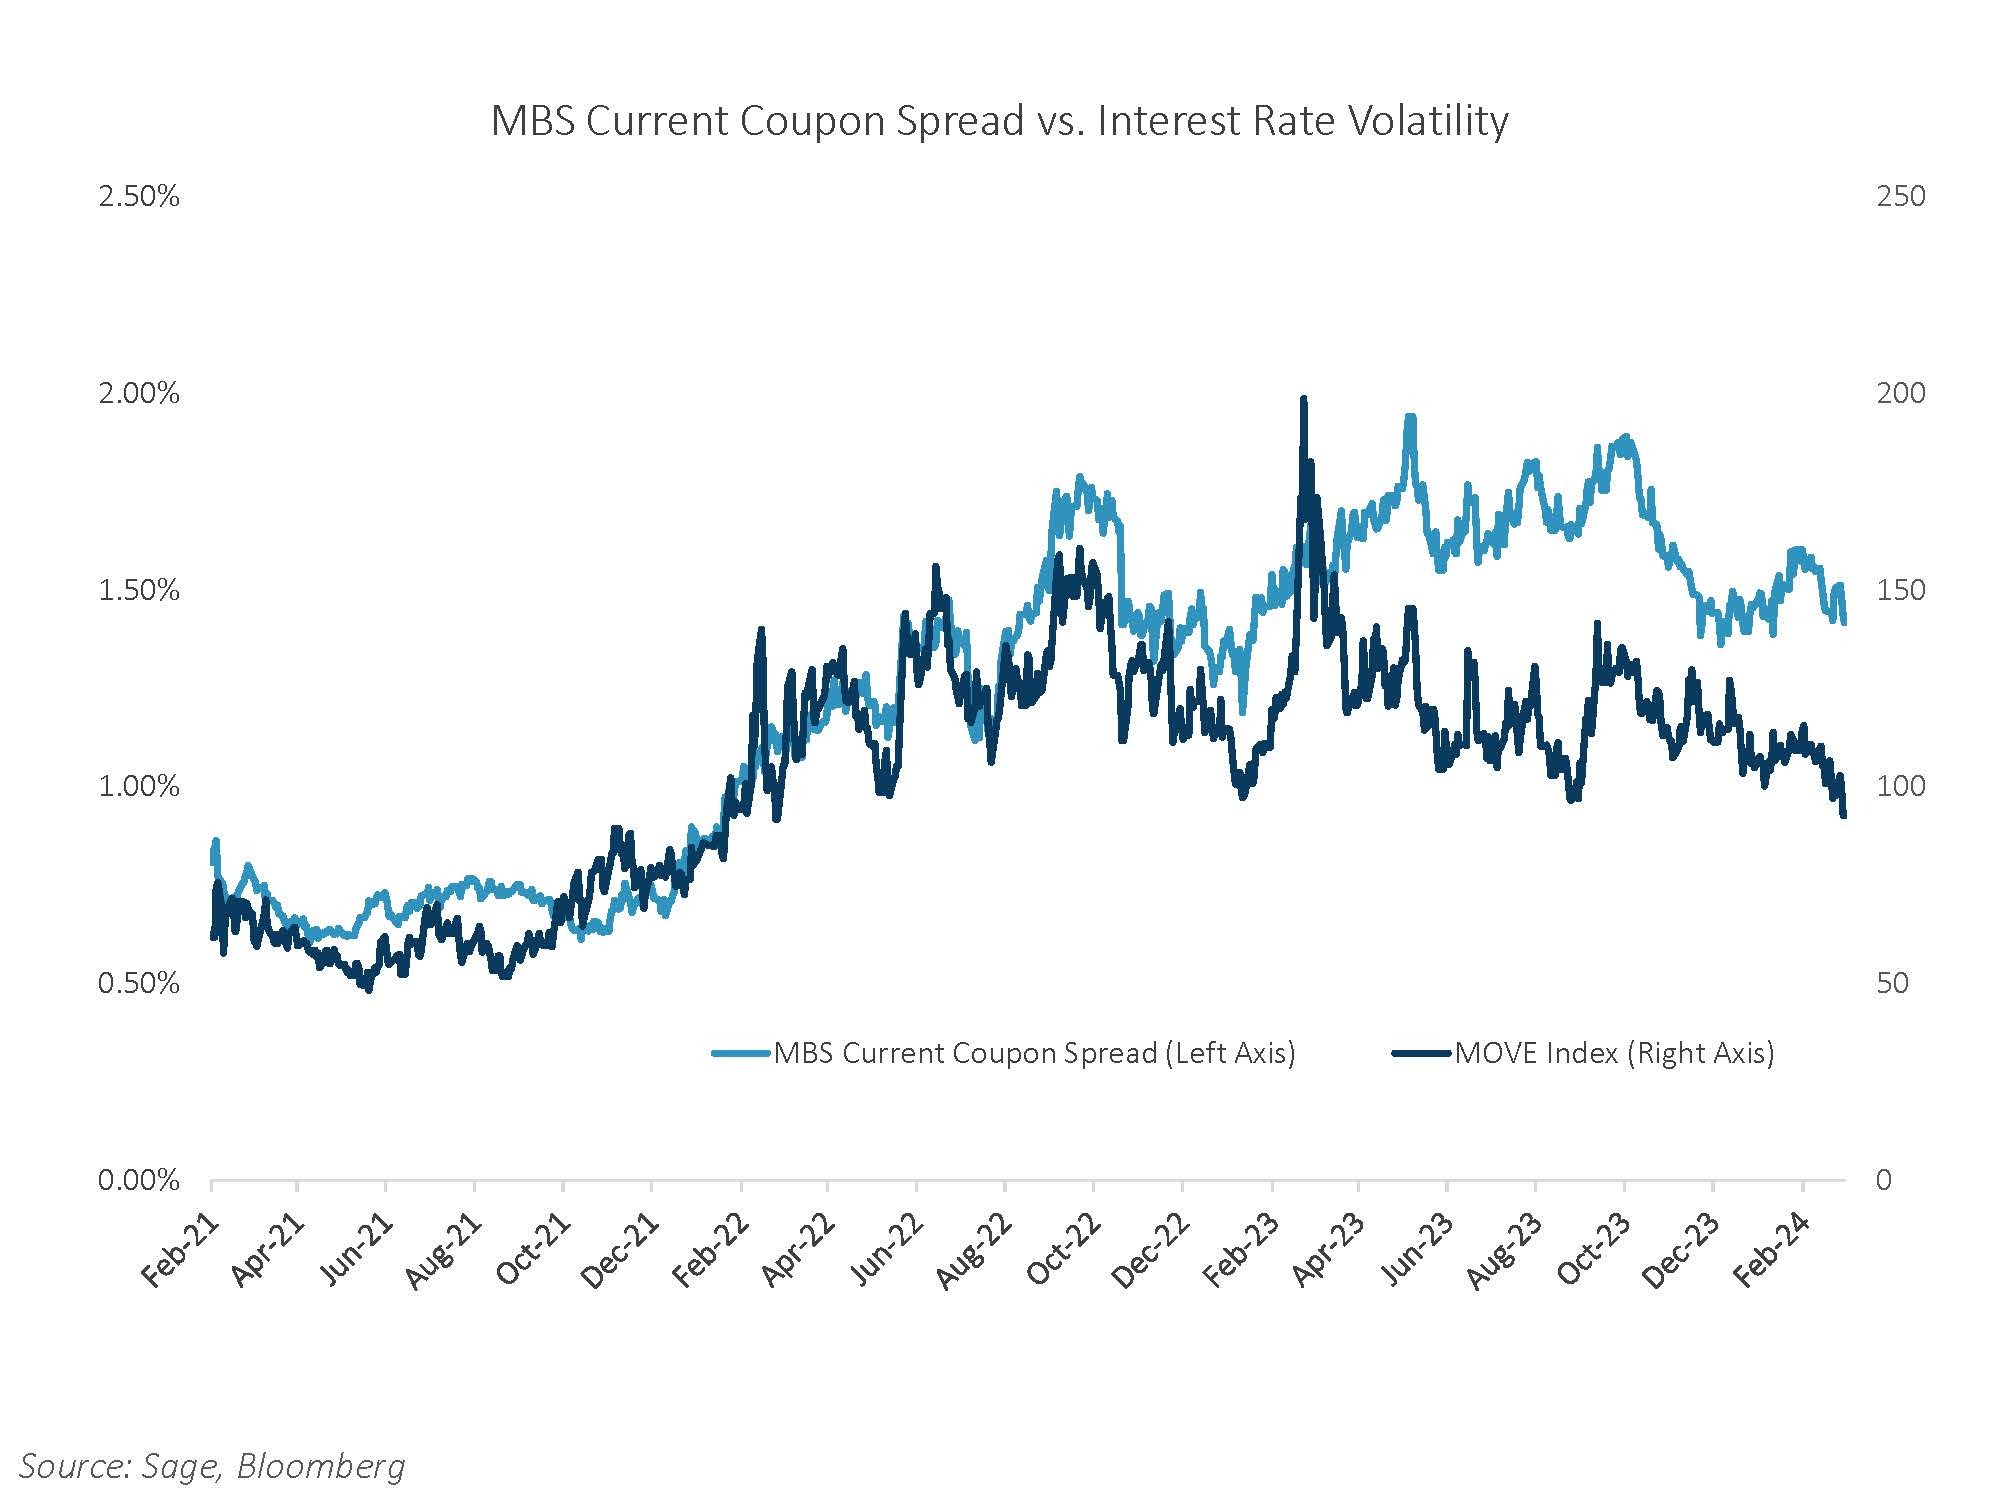 MBS Current Coupon Spread vs Interest Rate Volatility